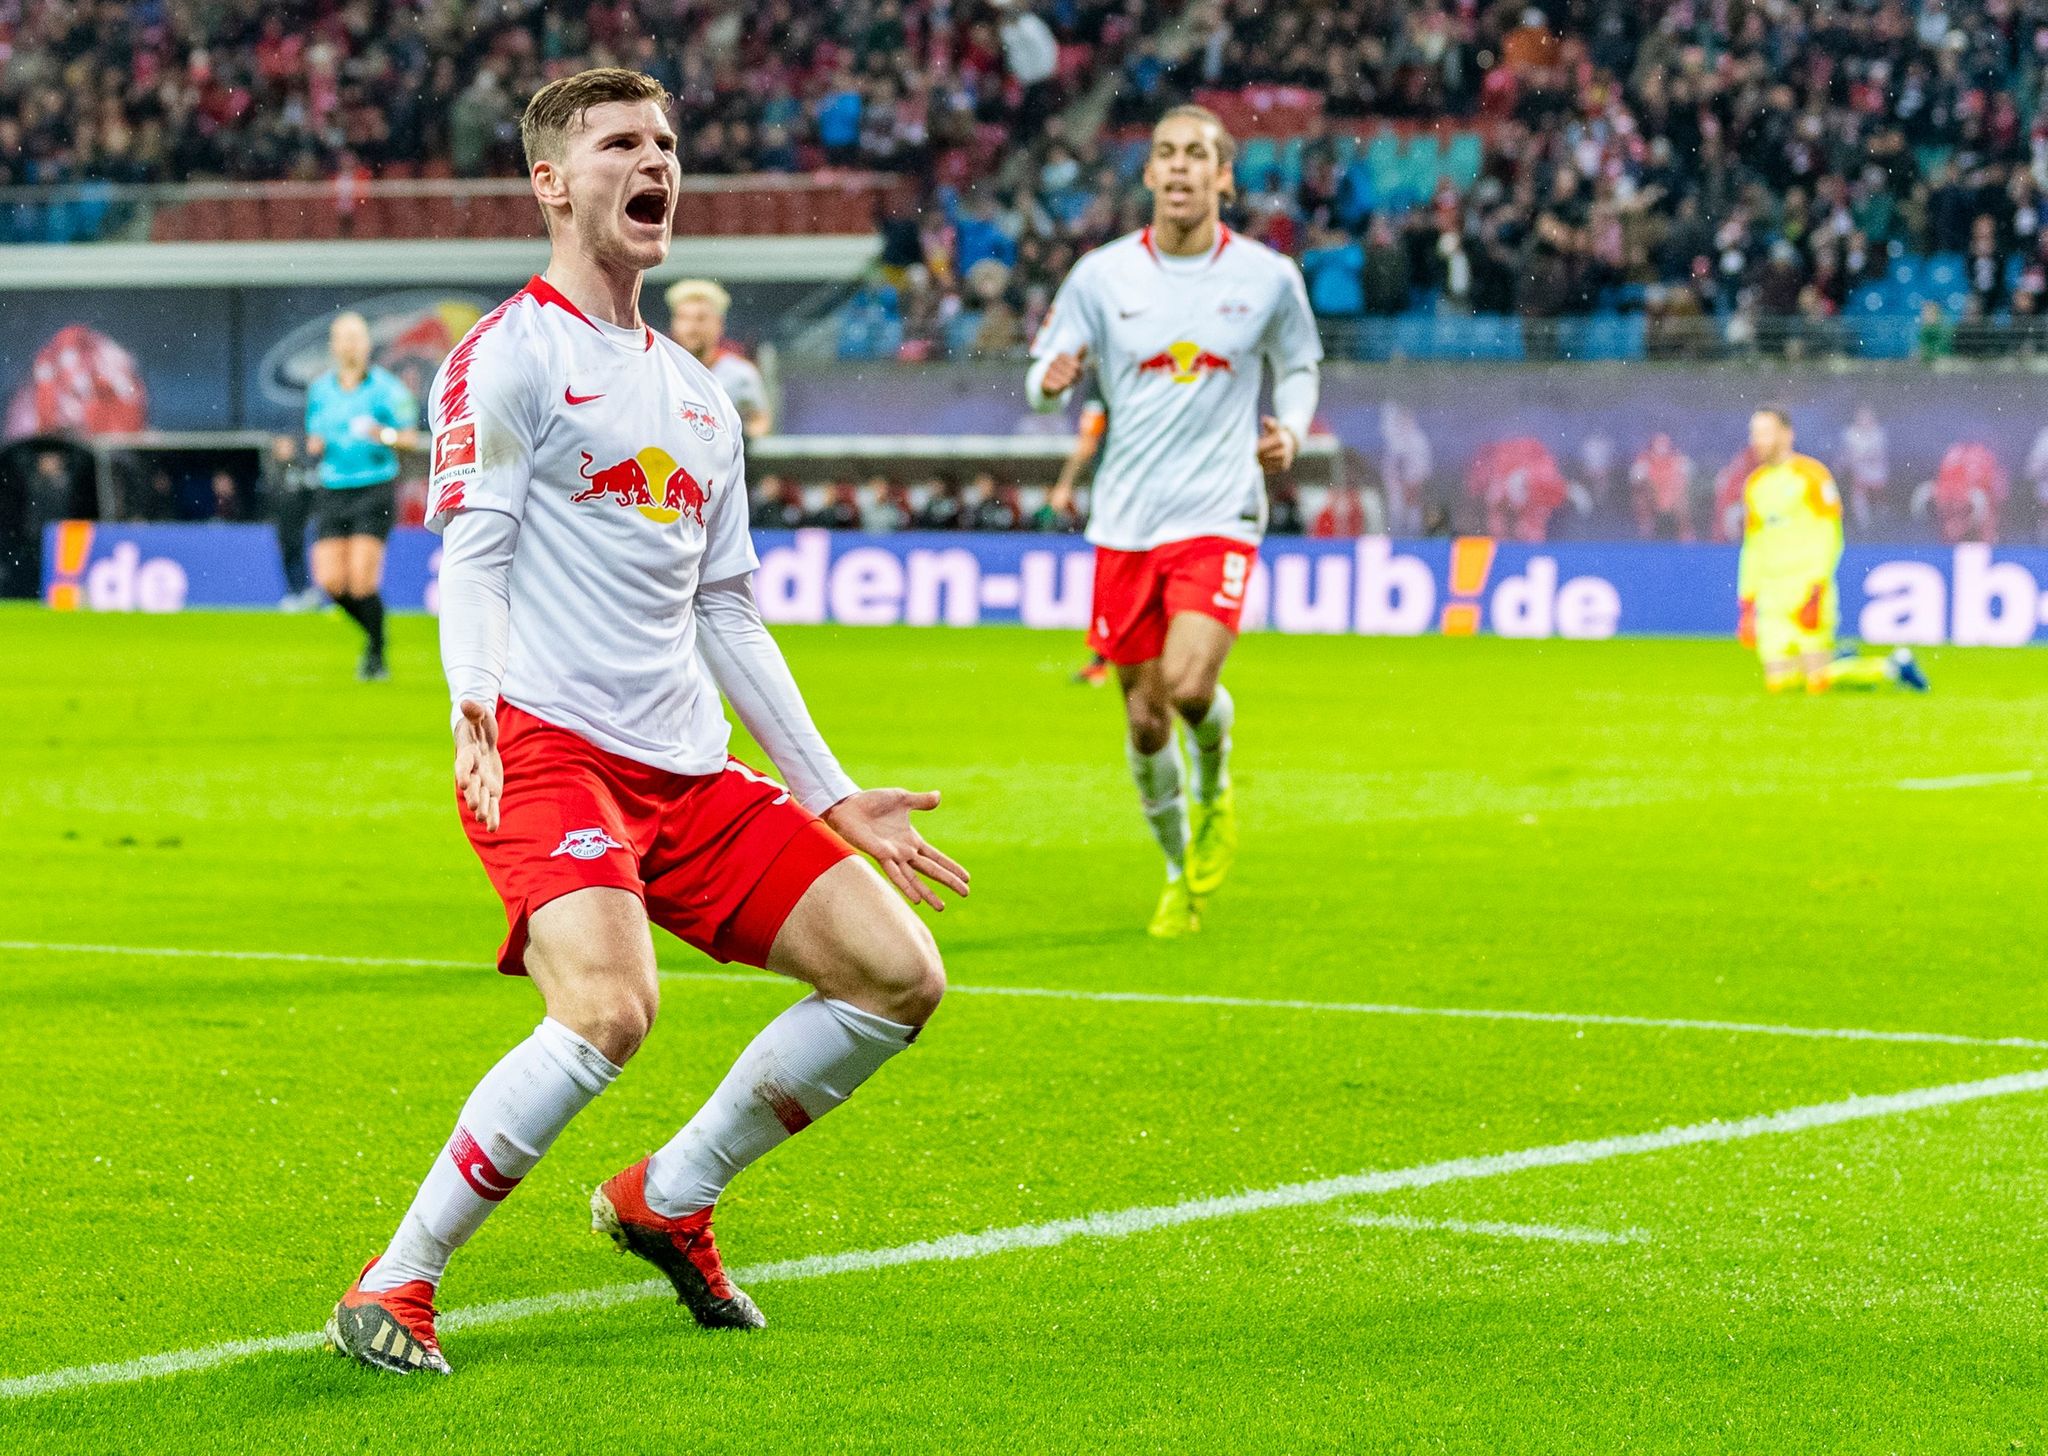 Leipzigs forward Timo lt;HIT gt;Werner lt;/HIT gt; celebrates scoring during the German first division Bundesliga football match between RB Leipzig and Werder Bremen in Leipzig, eastern Germany on December 22, 2018. (Photo by ROBERT MICHAEL / AFP) / RESTRICTIONS: DFL REGULATIONS PROHIBIT ANY USE OF PHOTOGRAPHS AS IMAGE SEQUENCES AND/OR QUASI-VIDEO